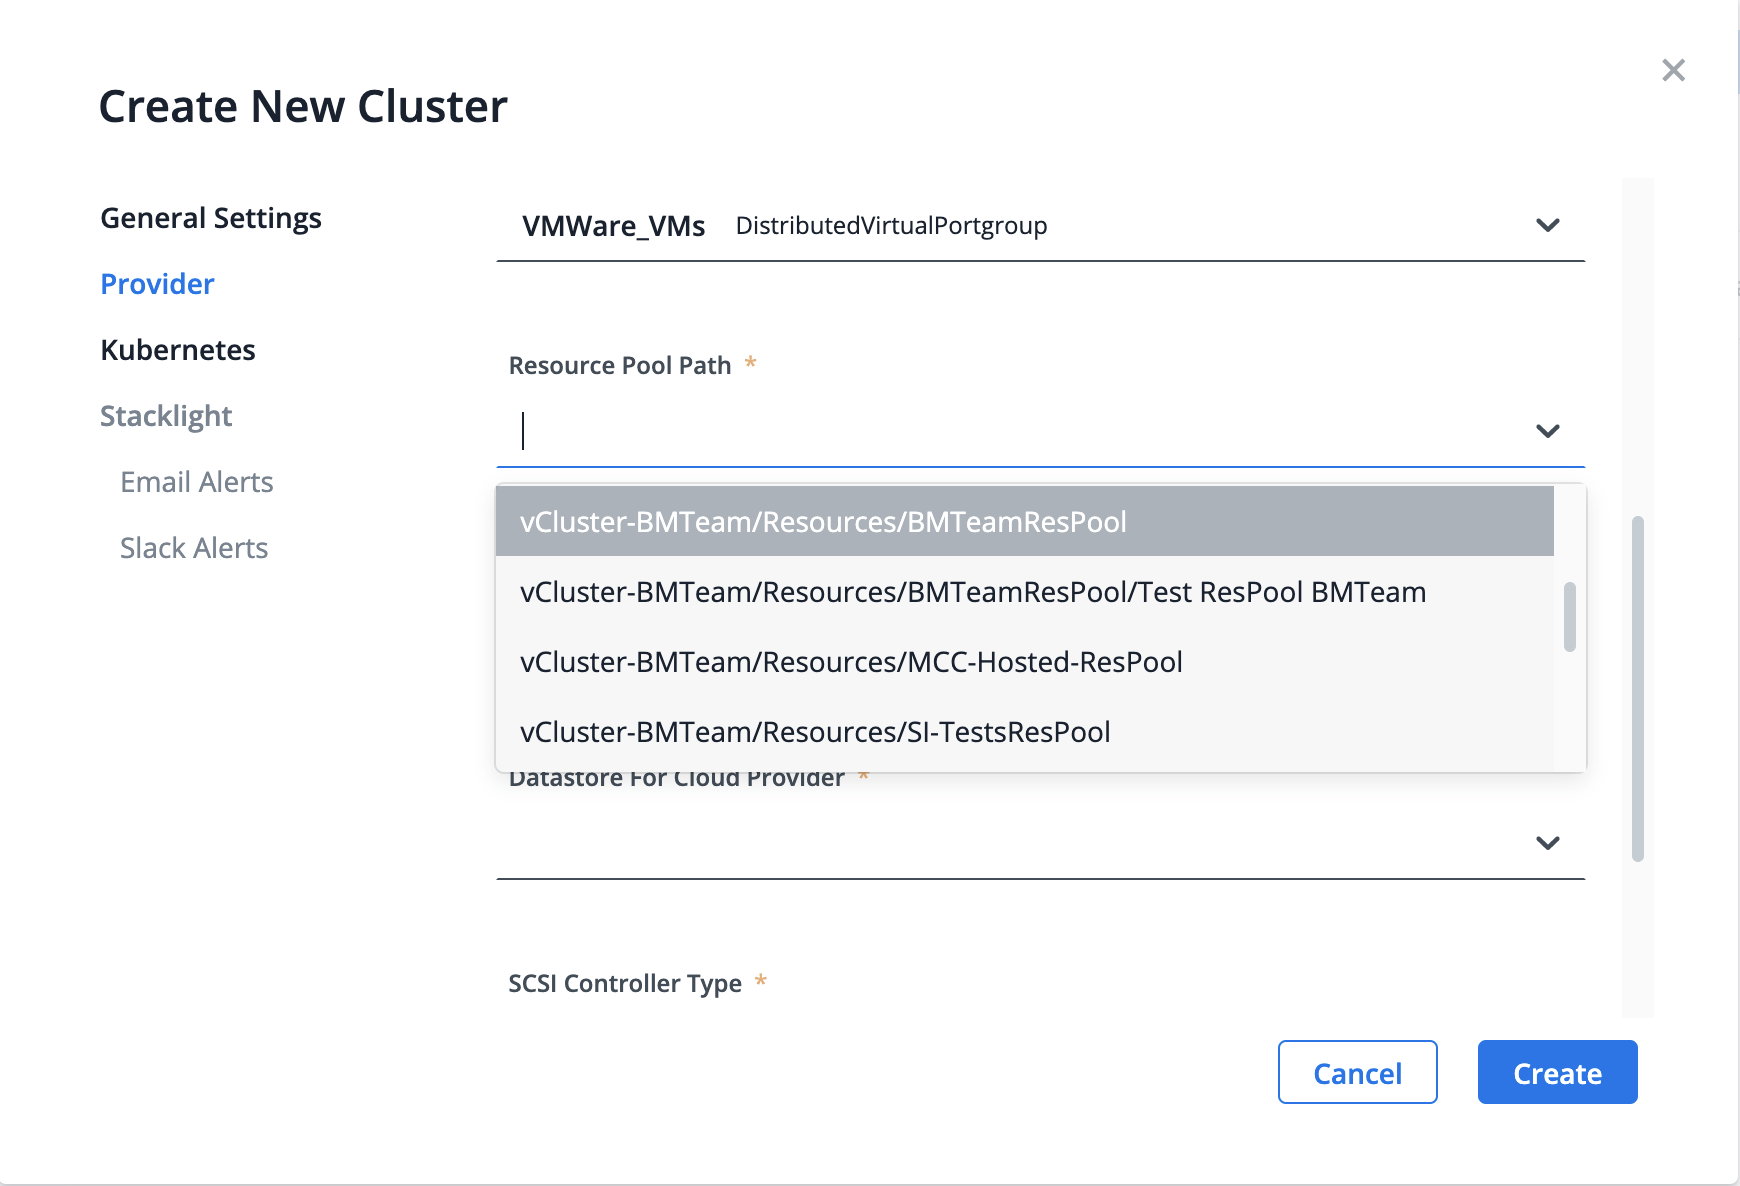 mirantis container cloud resource pool path